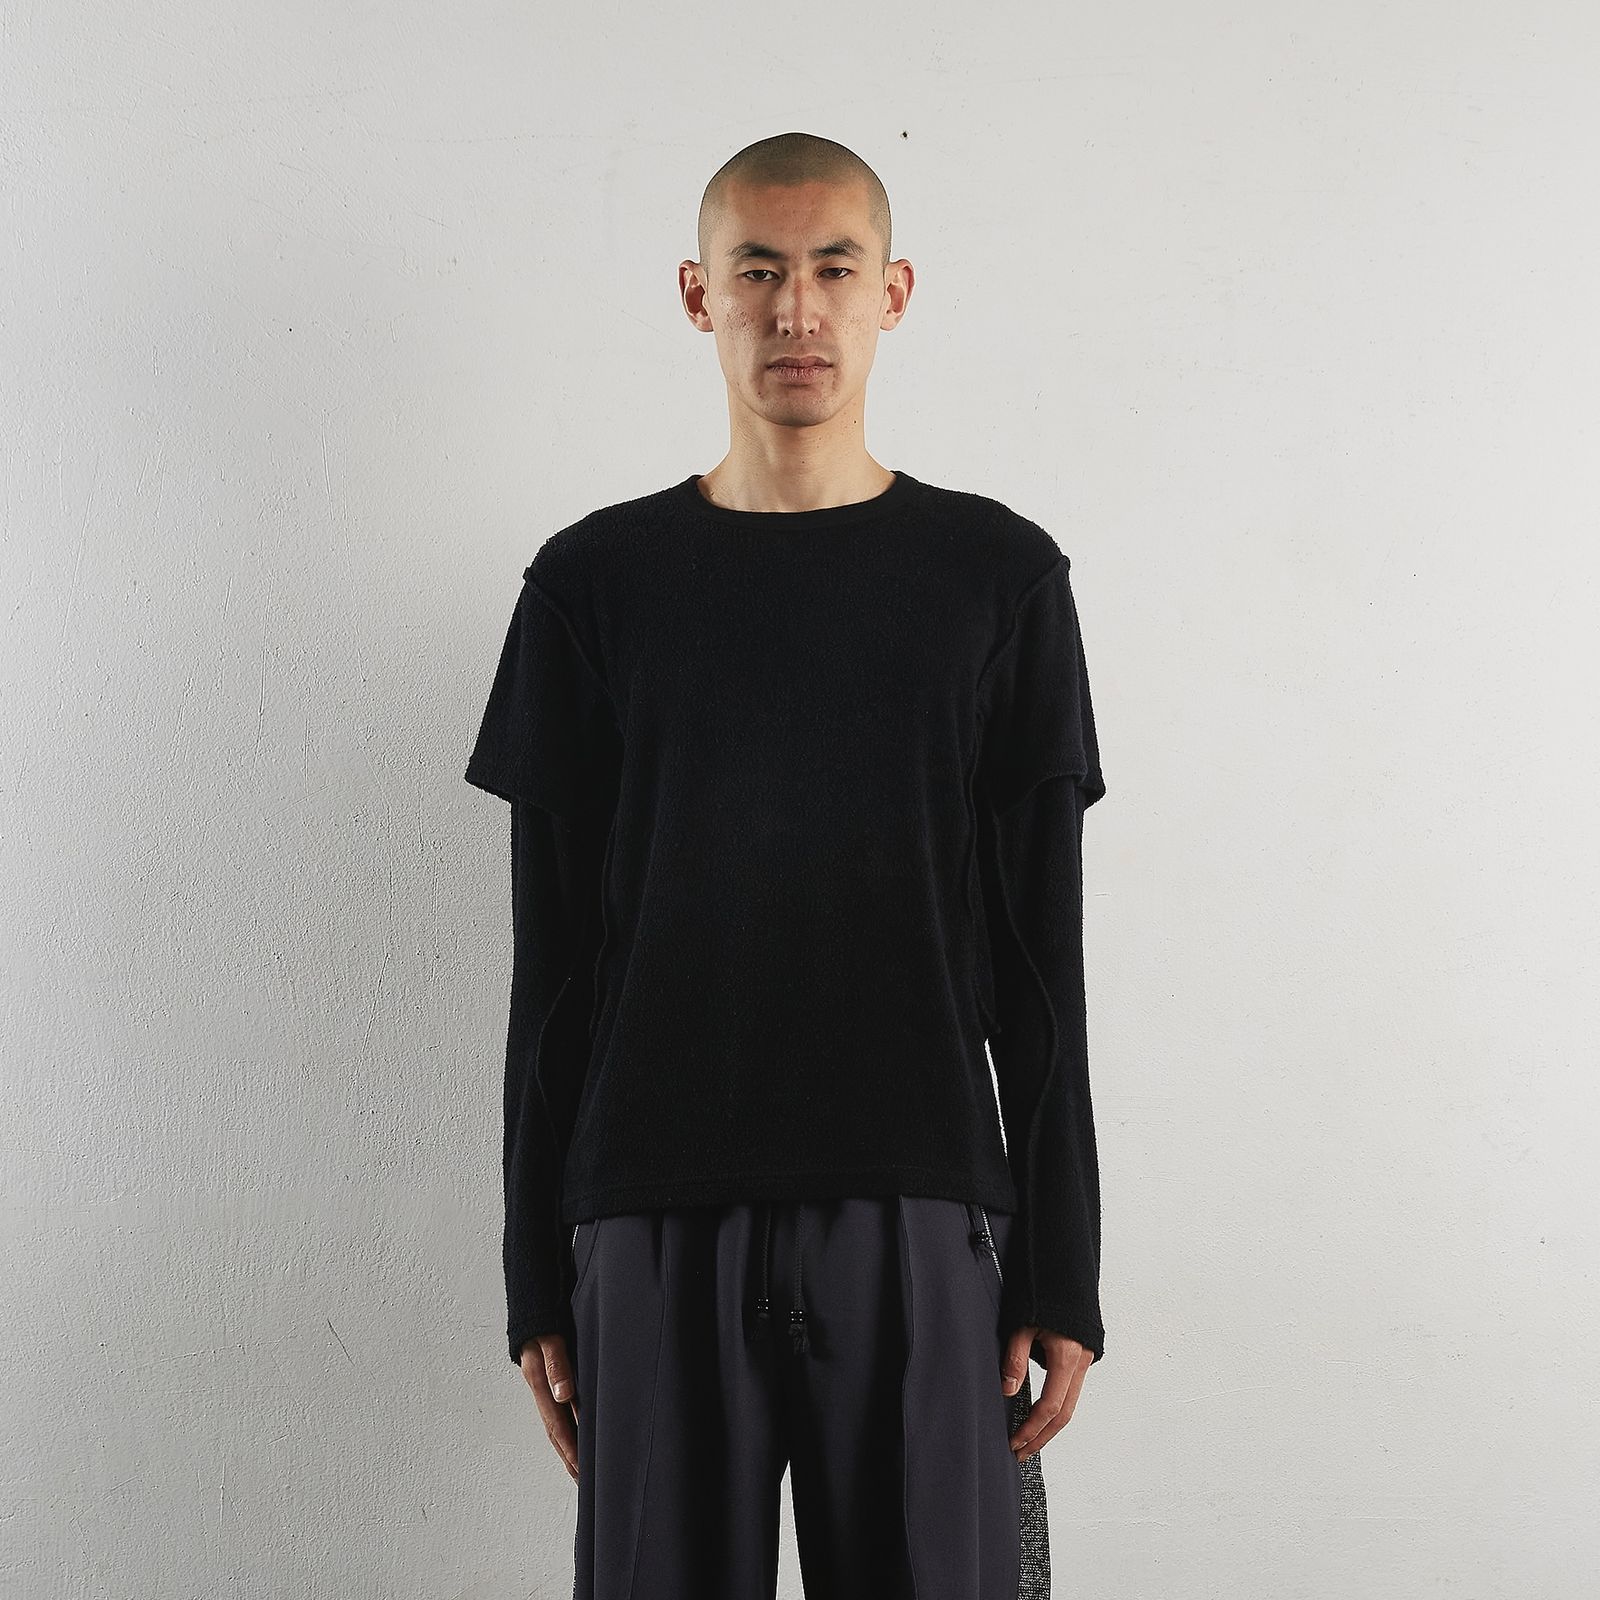 NVRFRGT - 【残りわずか】Terry Double Layer Long Sleeve T-shirt 